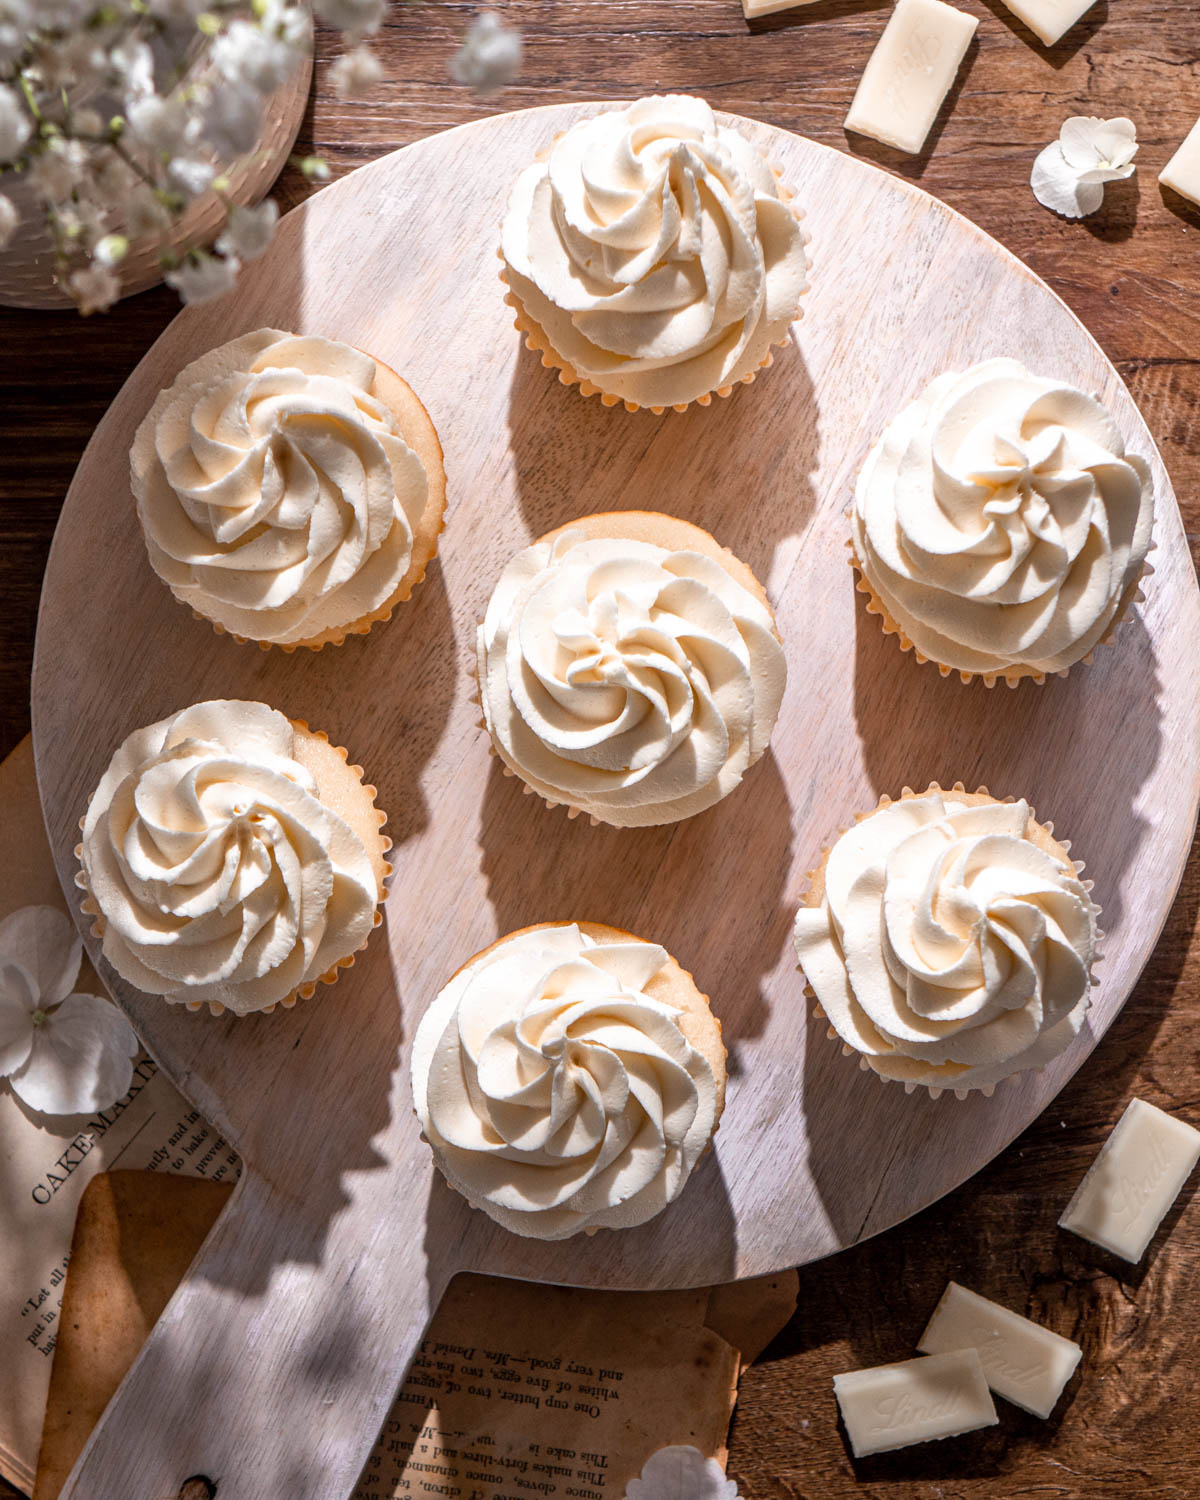 cupcakes topped with white chocolate buttercream